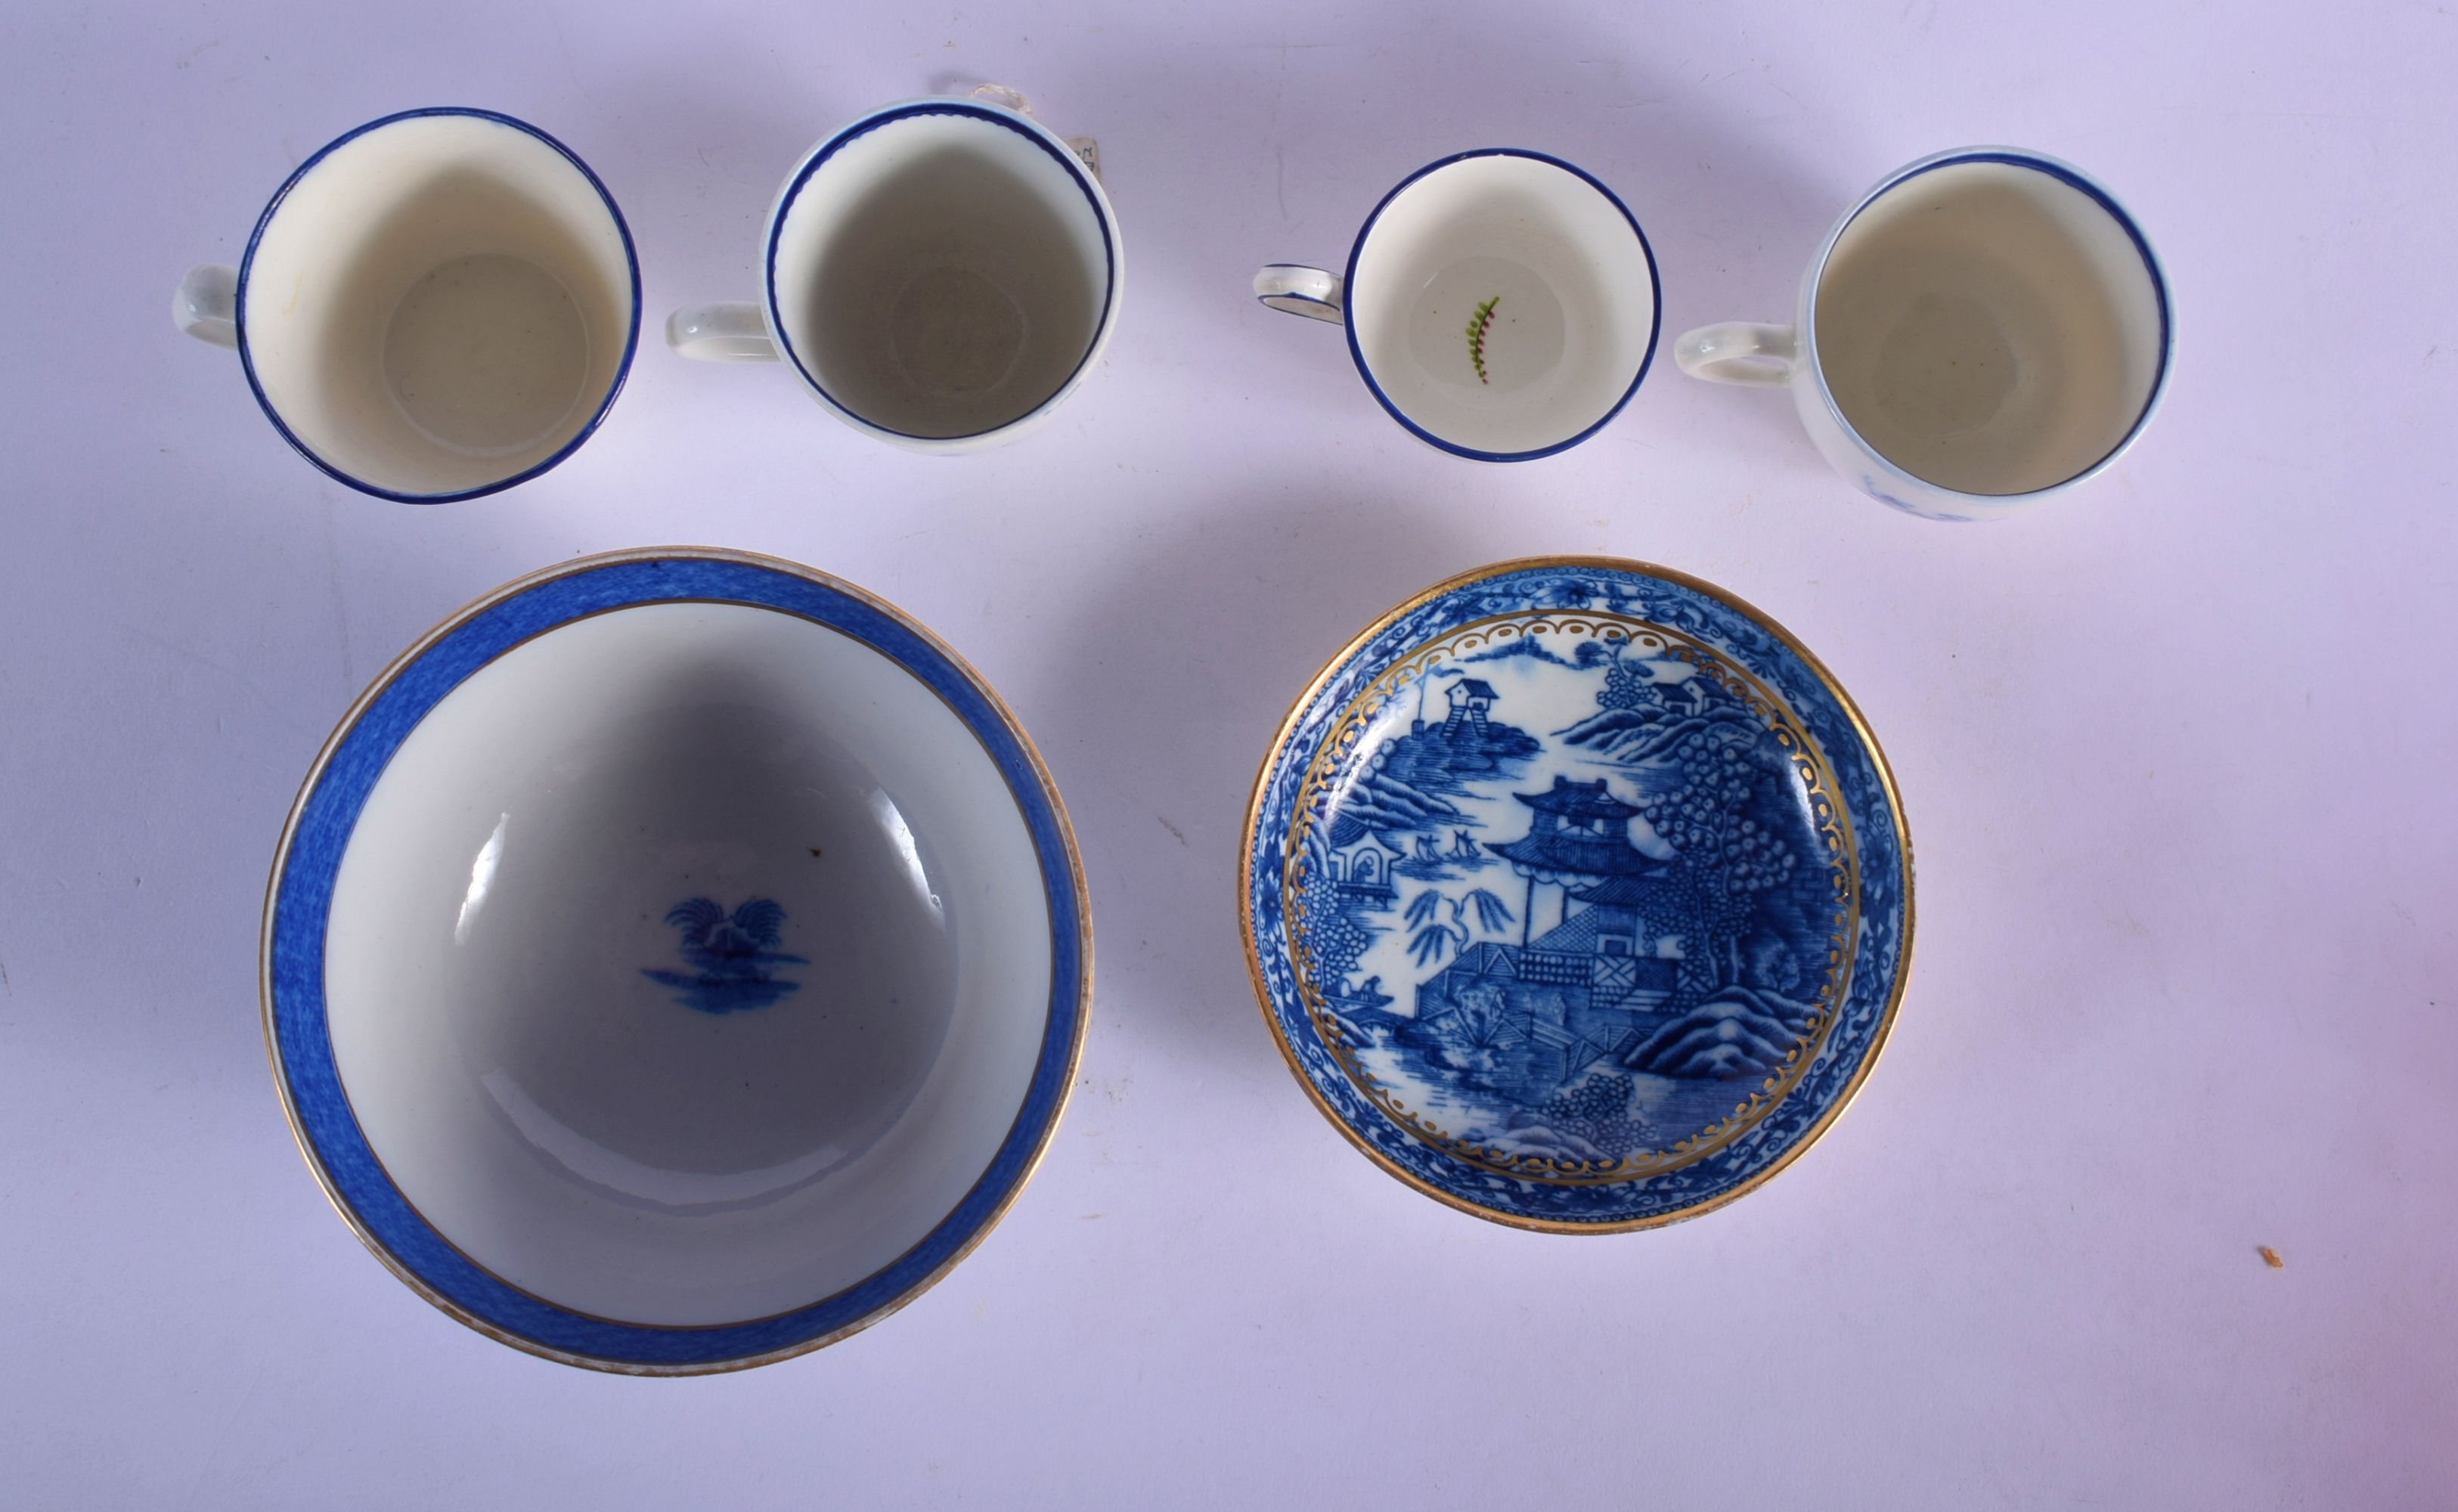 THREE LATE 18TH CENTURY CAUGHLEY BLUE AND WHITE CUPS, with a Caughley Fenced Garden Pattern Saucer - Image 11 of 12